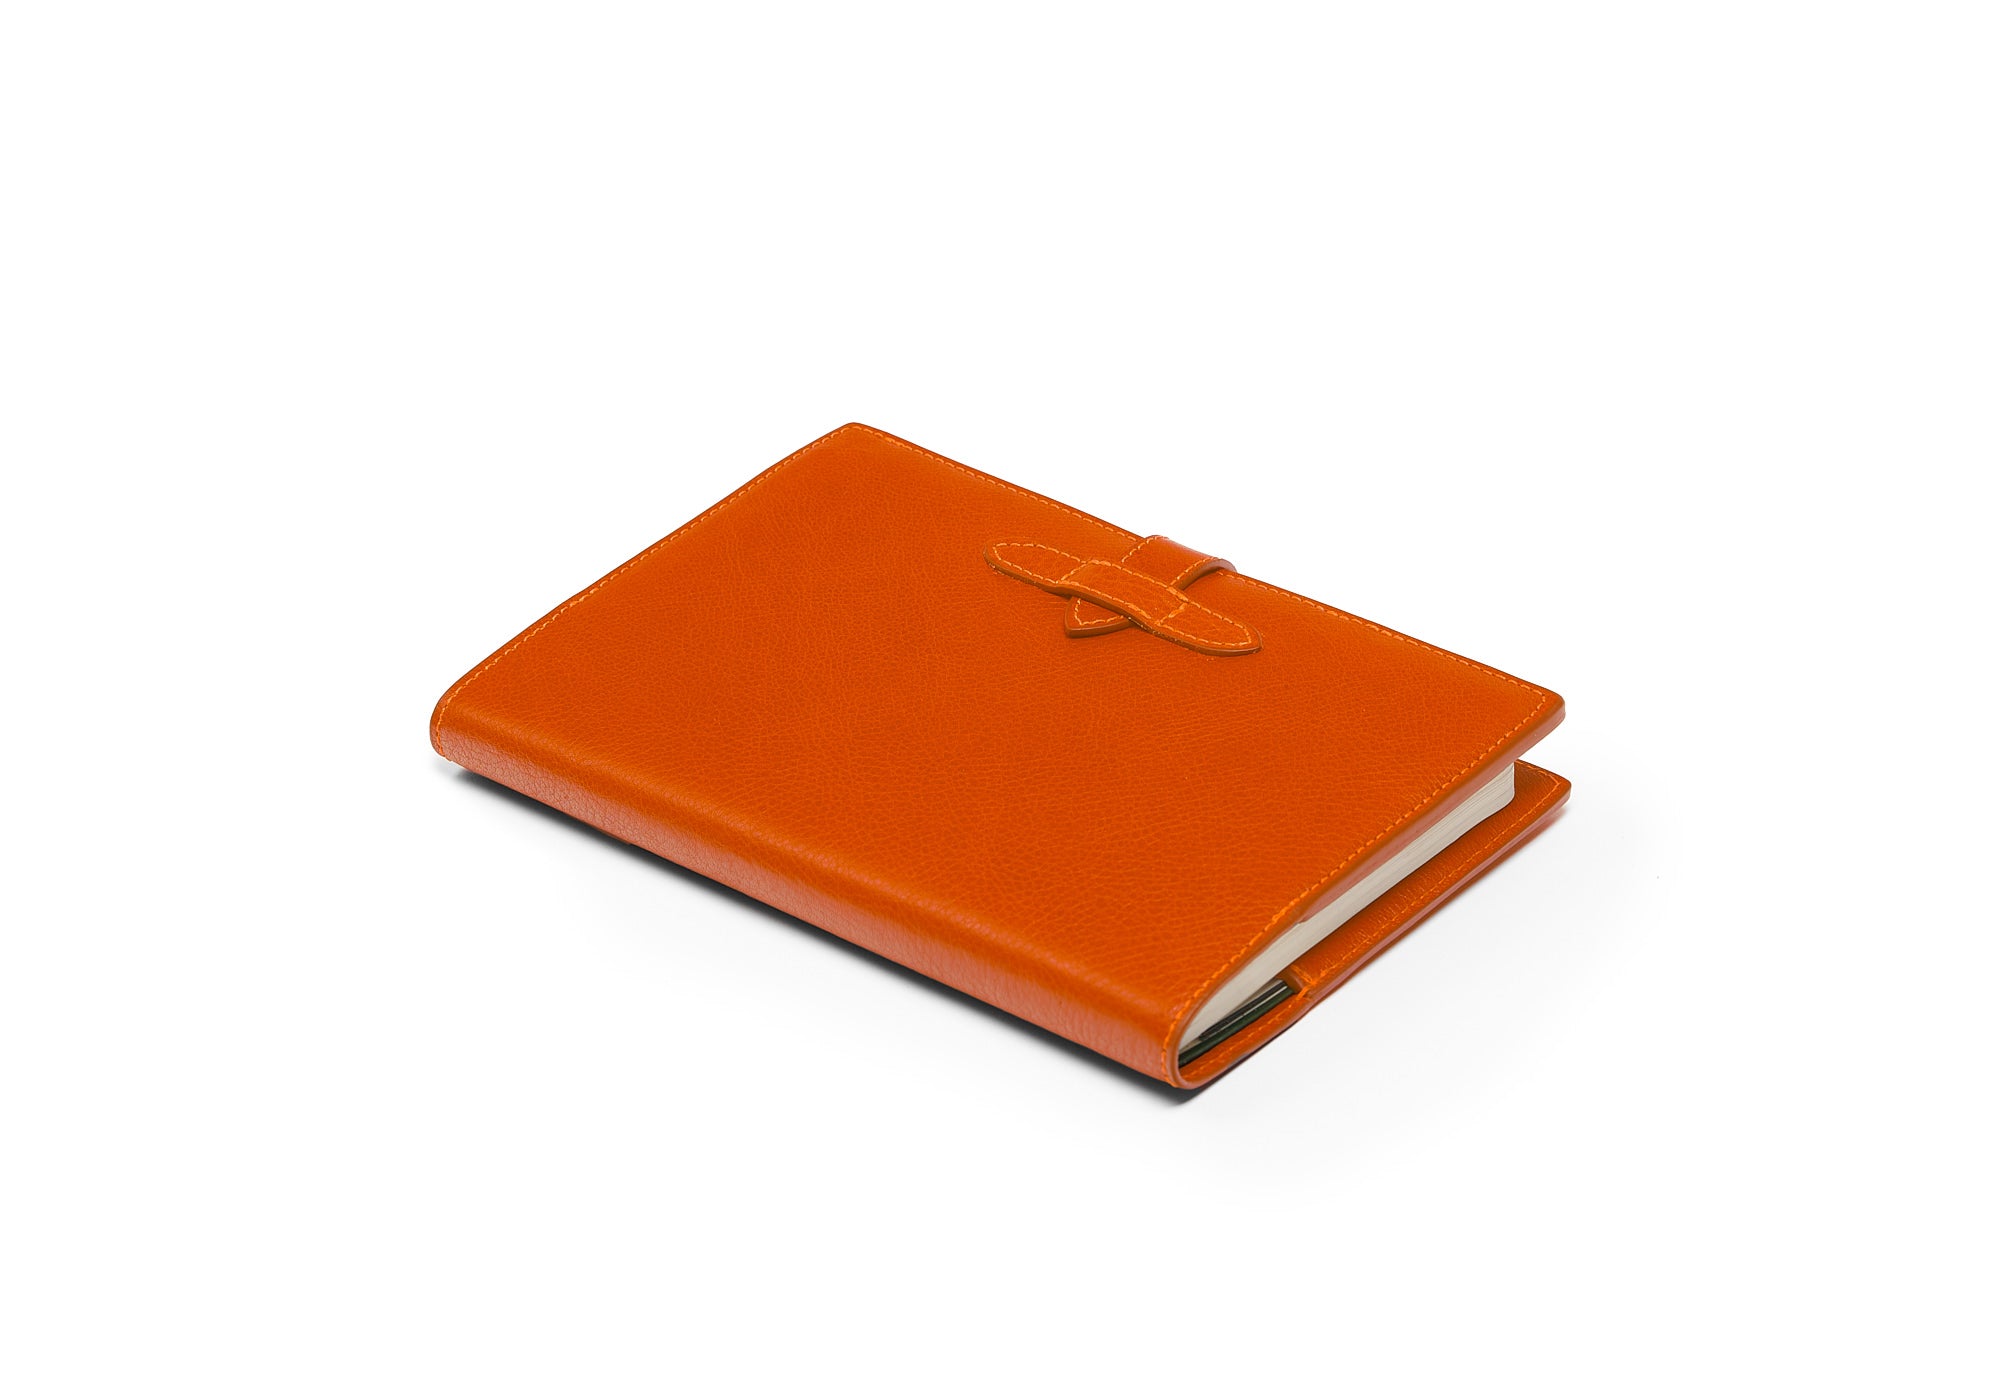 Full View of Leather Travel Journal Orange